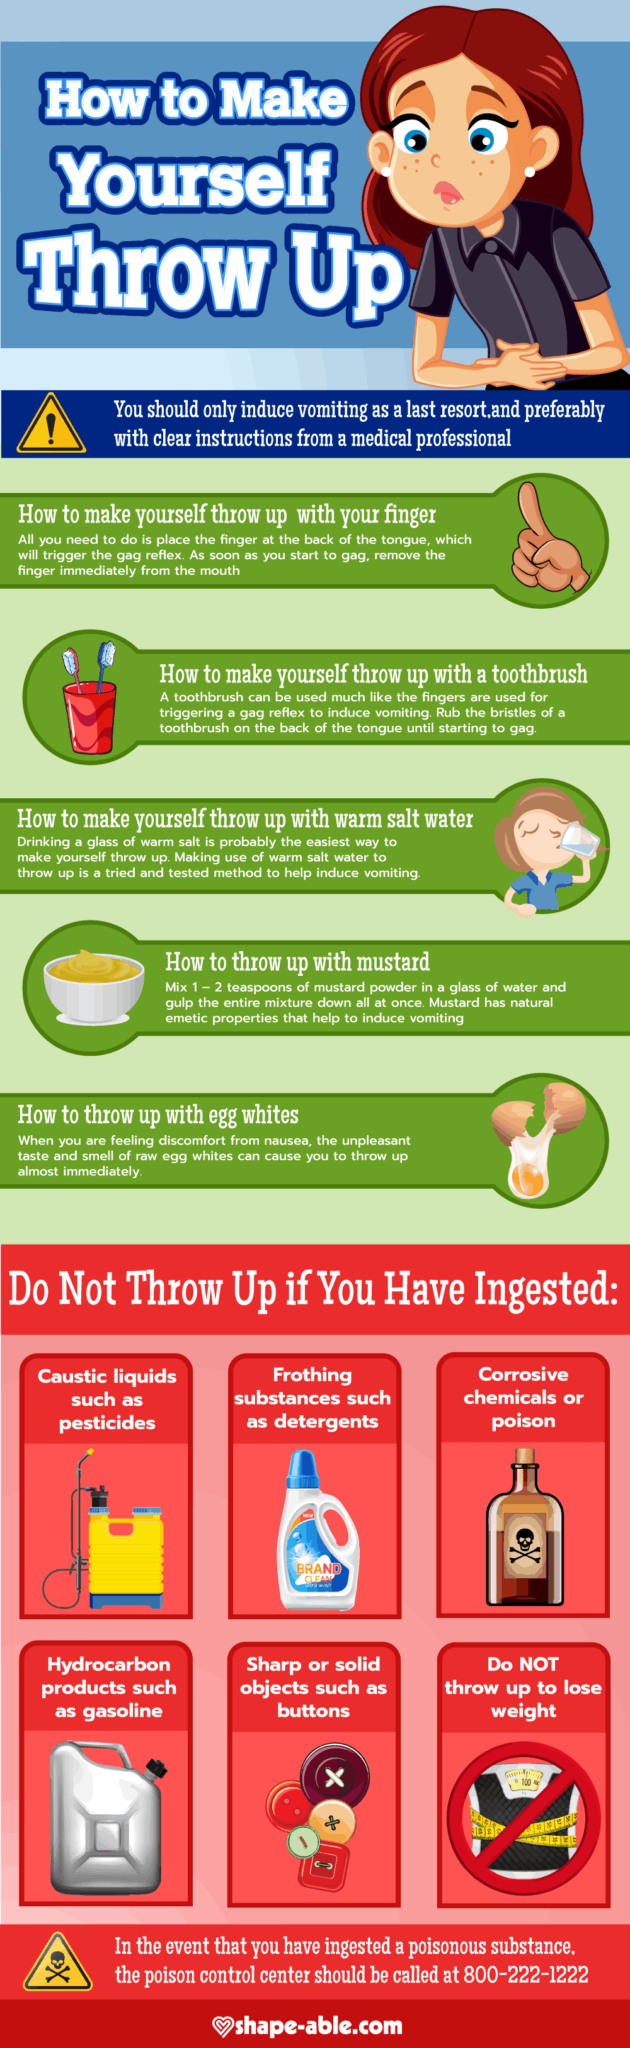 best foods to eat after throwing up